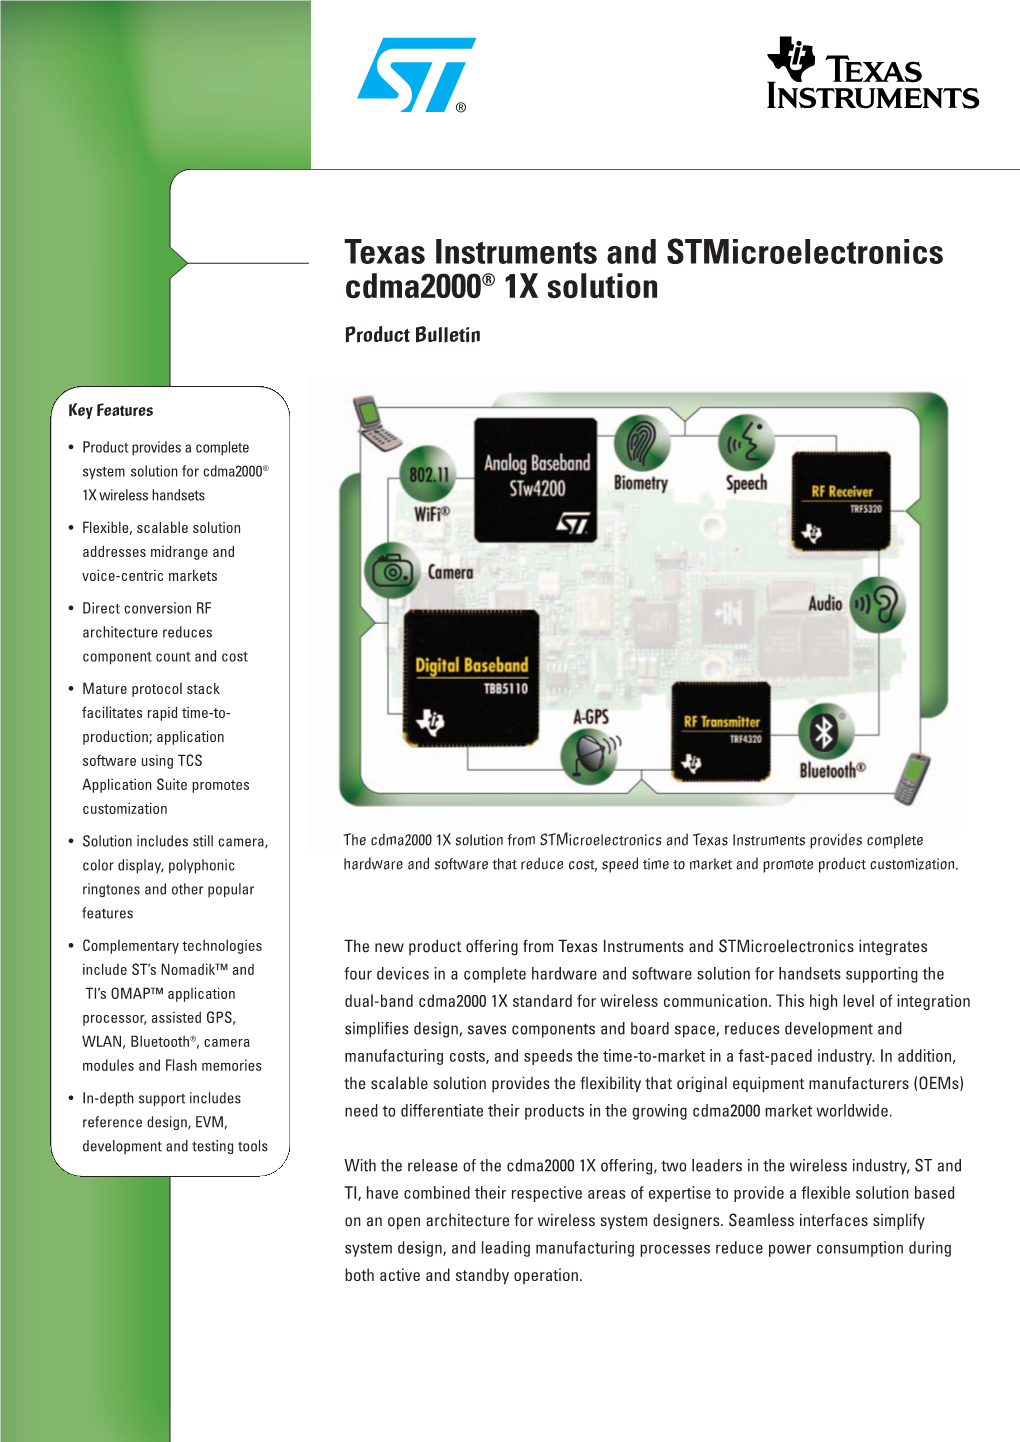 Texas Instruments and Stmicroelectronics Cdma2000® 1X Solution